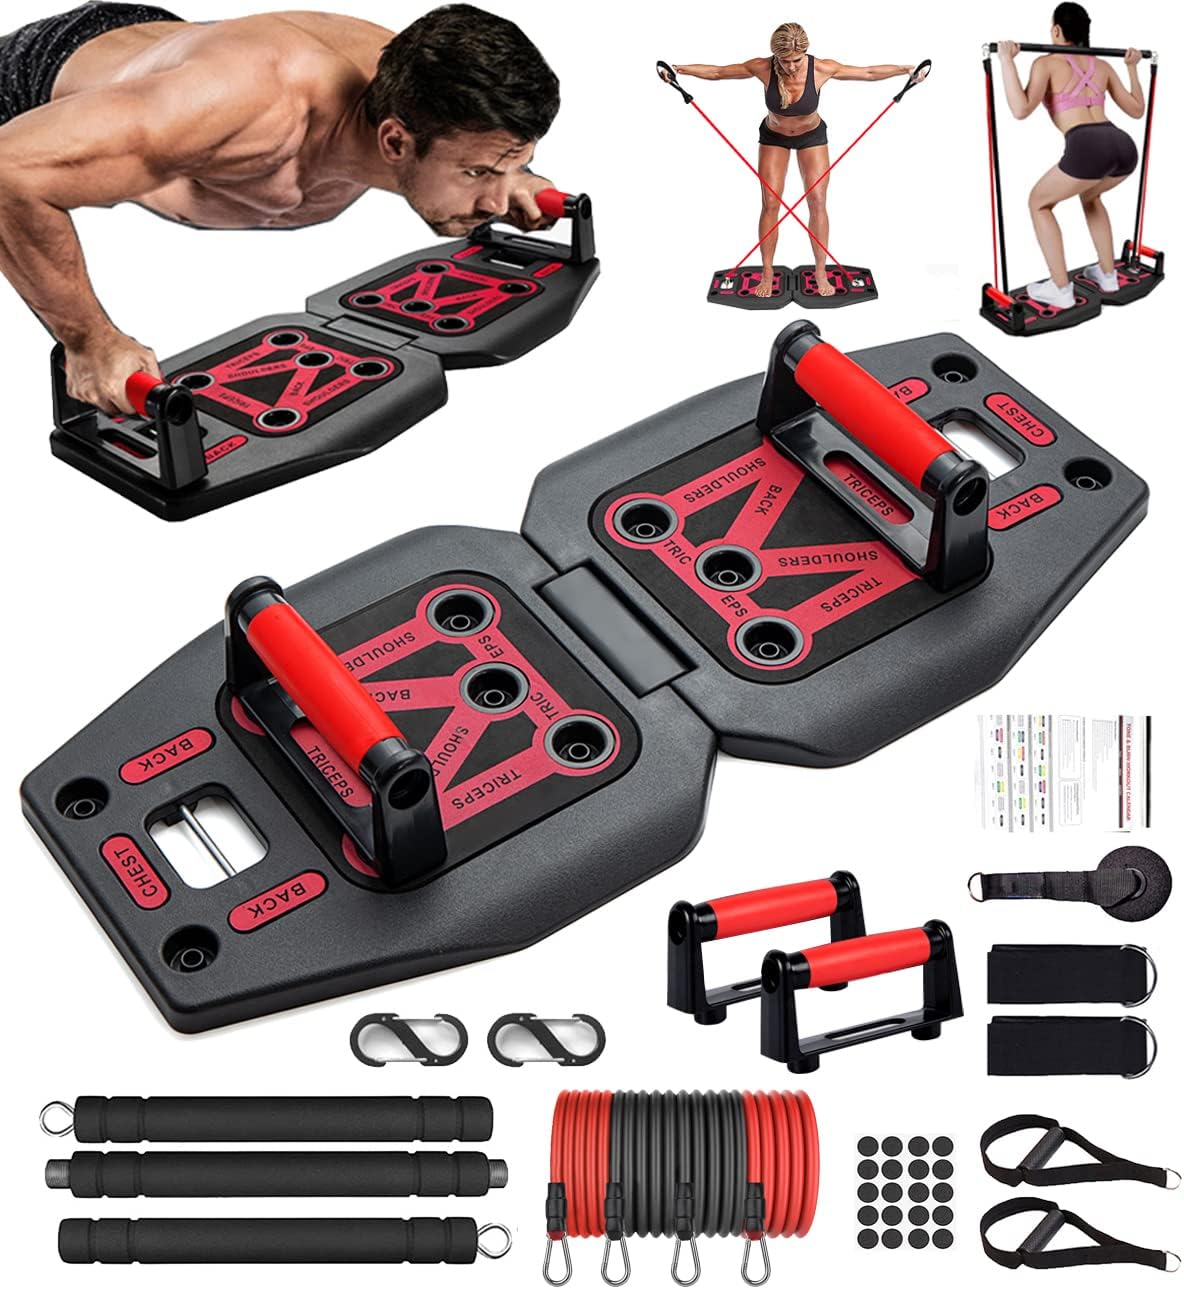 Home Gym Exercise Equipment - Portable Workout System 17 Fitness